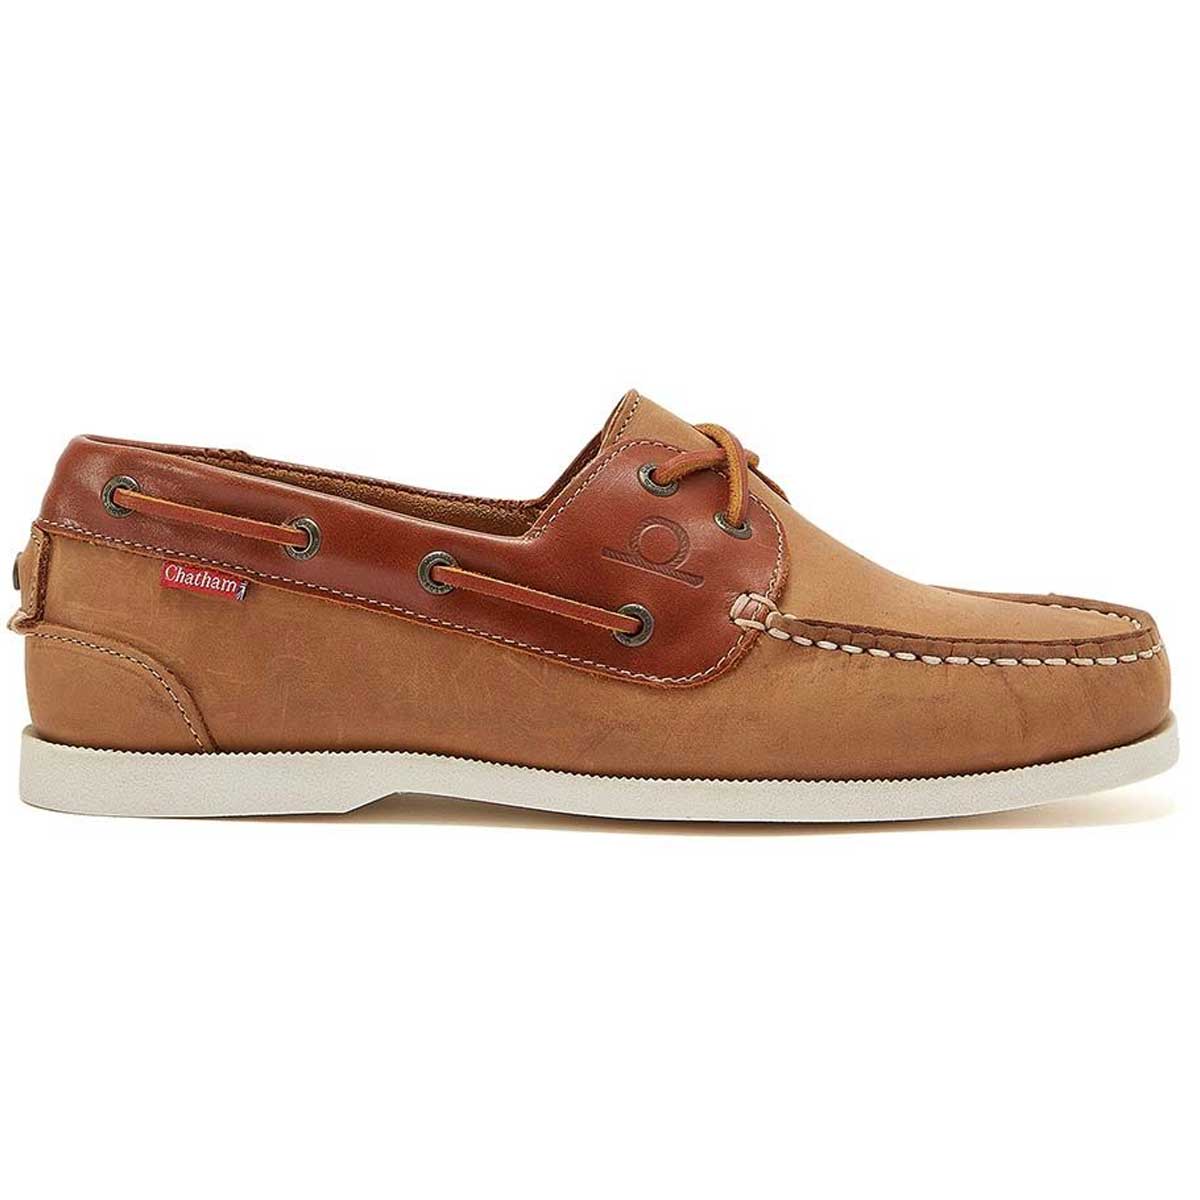 CHATHAM Galley II Leather Boat Shoes - Men's - Tan